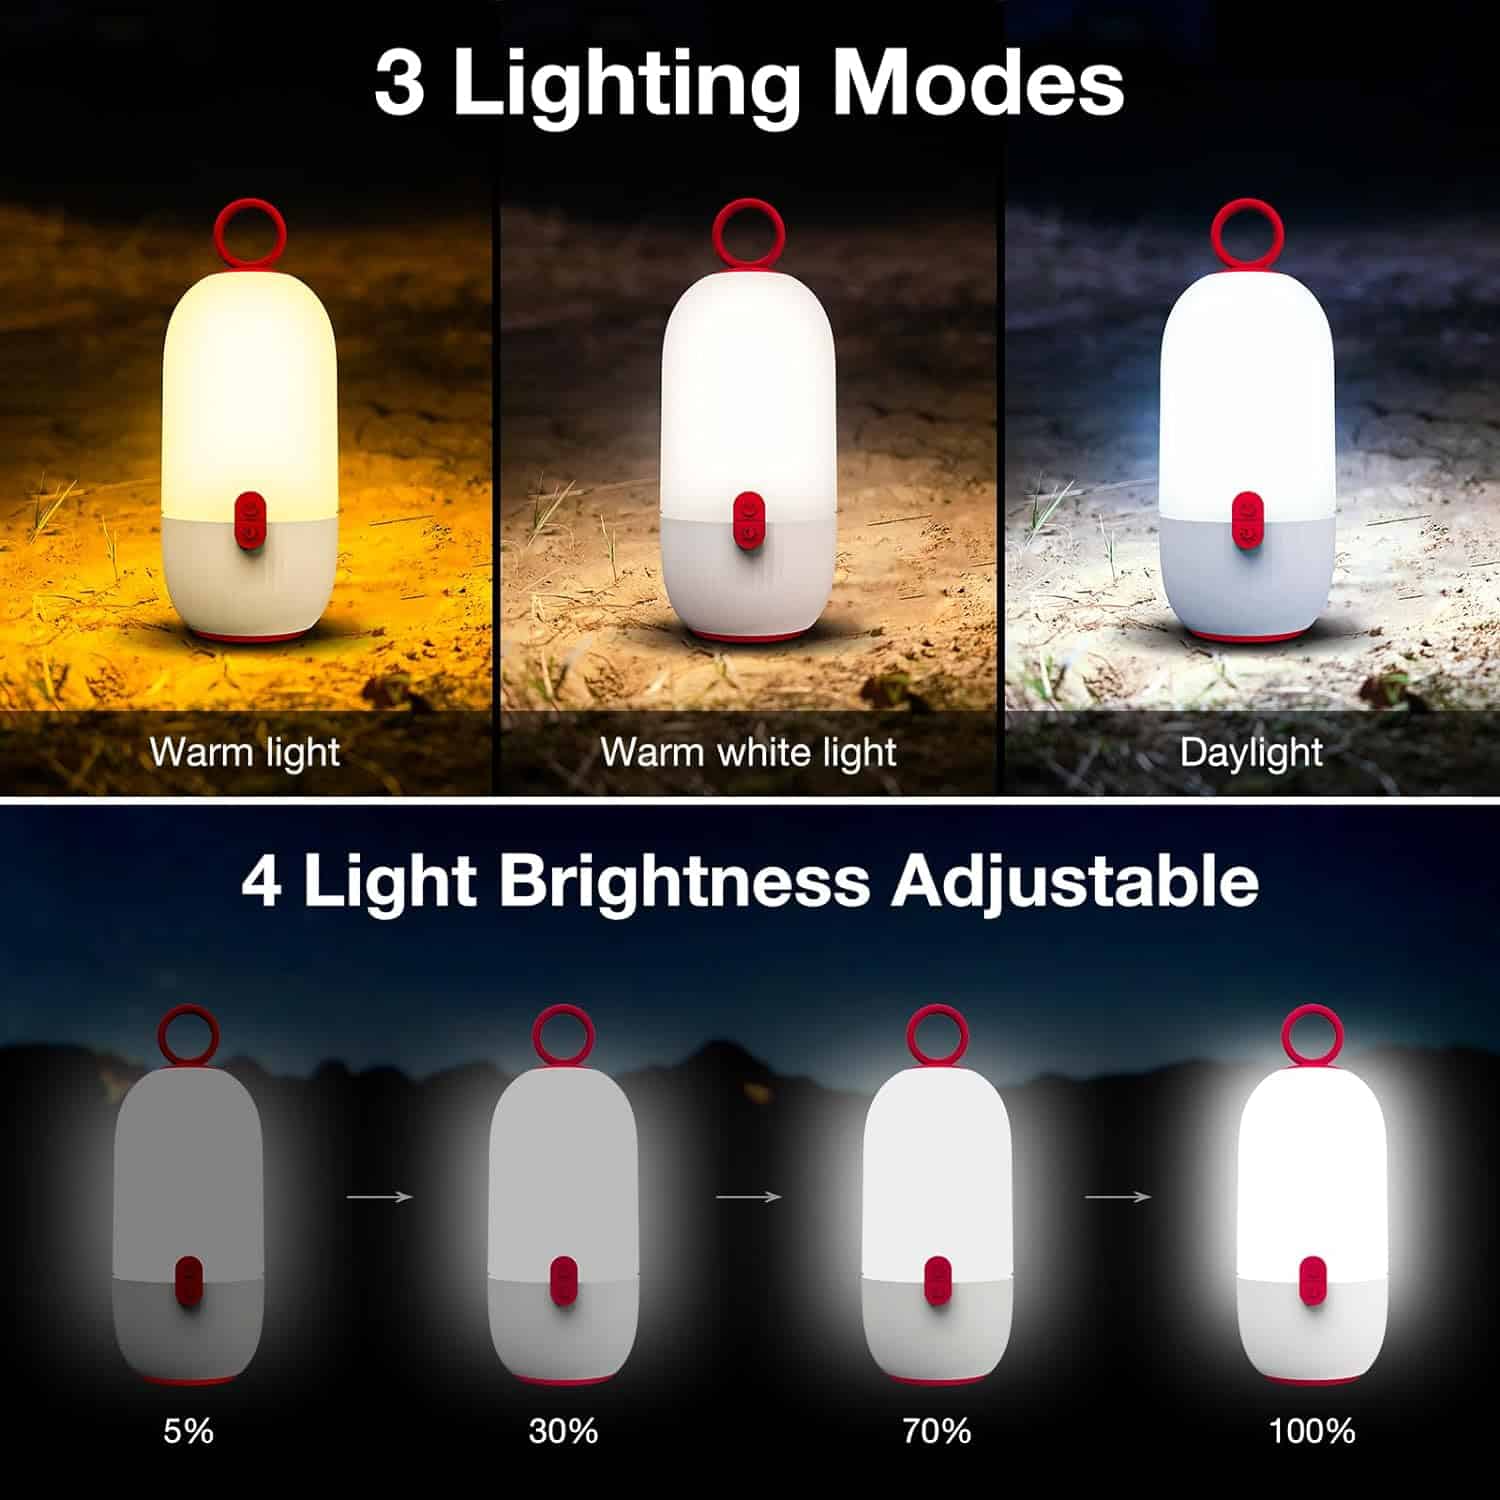 LED Camping Lantern Rechargeable, DeckTok RGB Camping Lights, Changing Color, 1200LM, 16 Multicolor Light Modes, Waterproof Portable Lanterns for Power Outages, Hiking, Emergency, Home-1 Pack